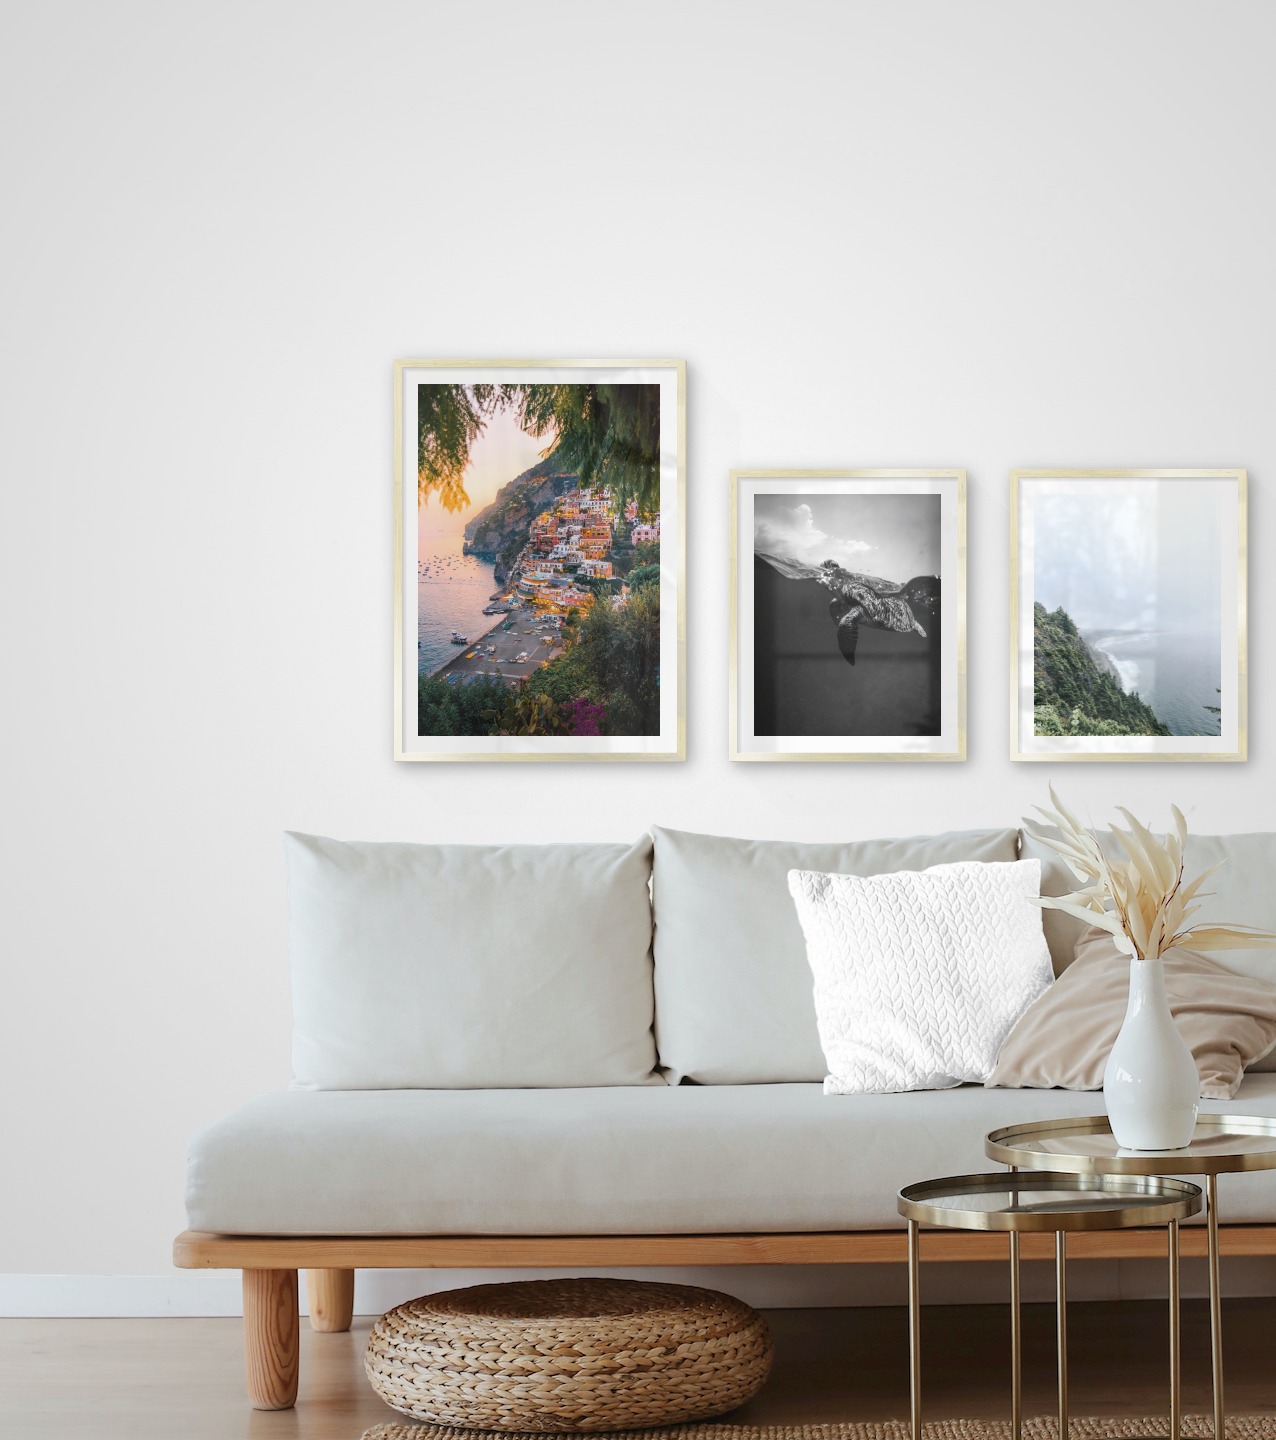 Gallery wall with picture frames in gold in sizes 50x70 and 40x50 with prints "City by the sea", "Turtle" and "Rocks facing the water"